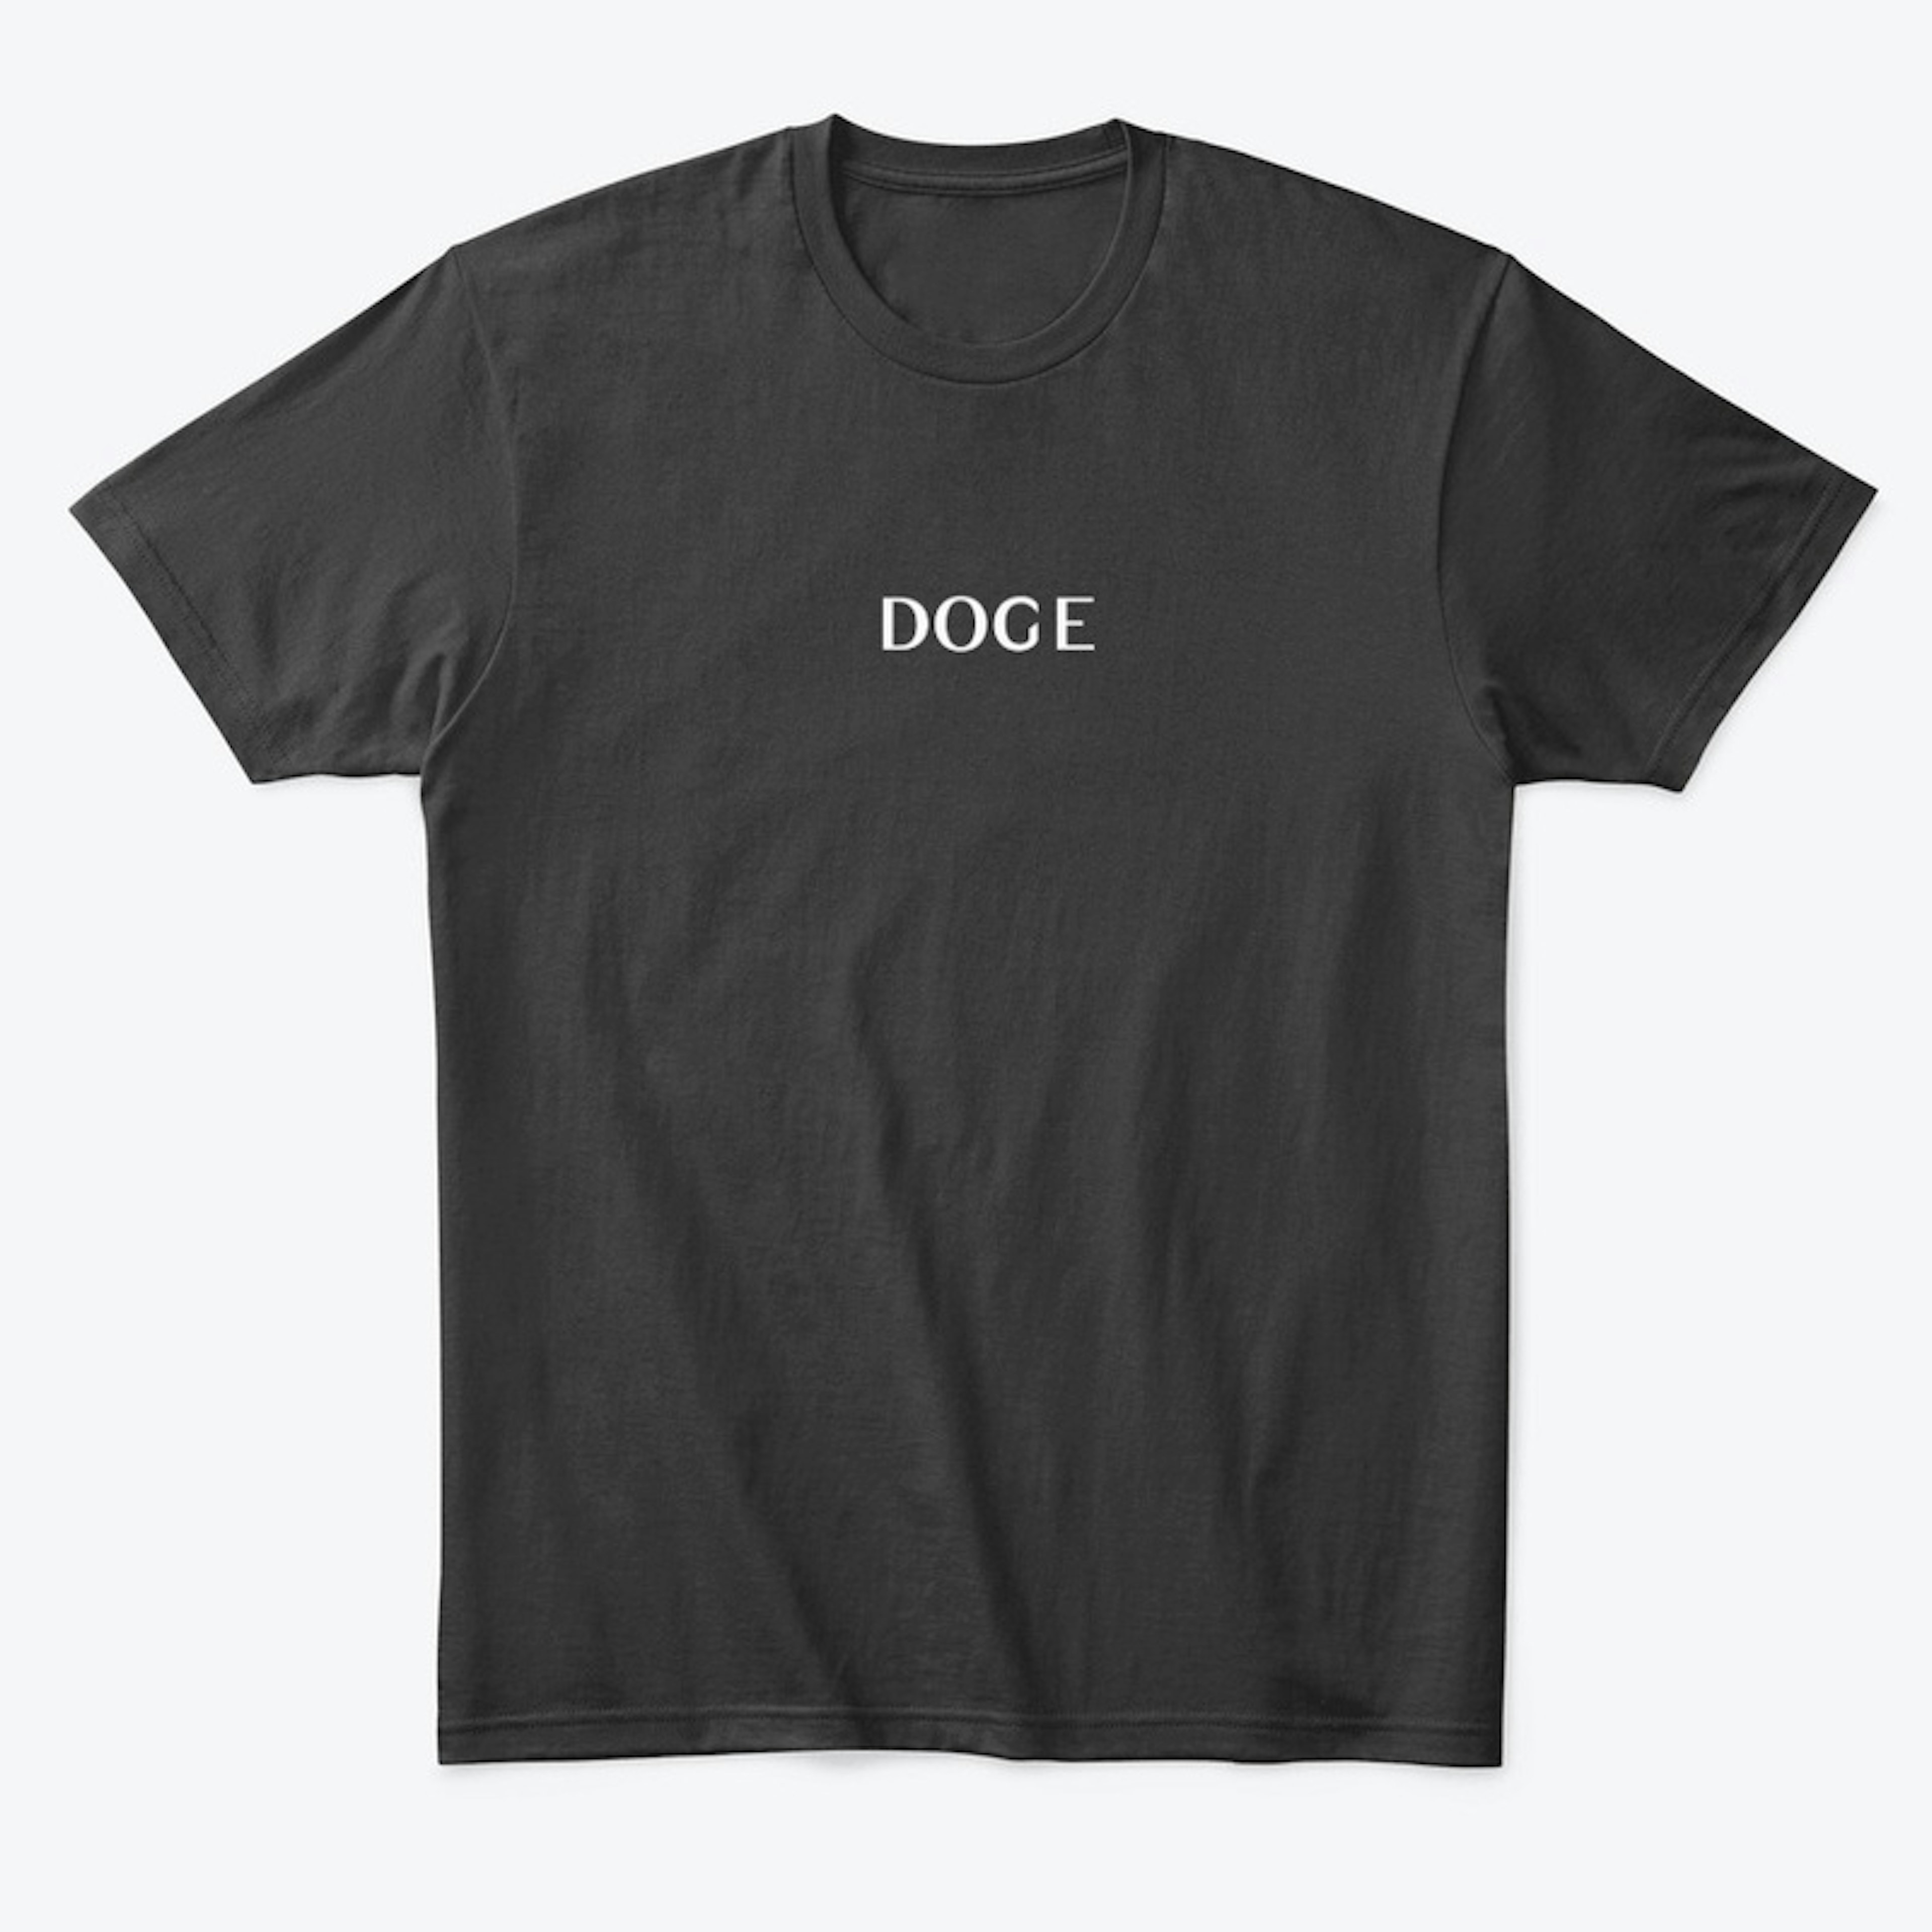 DOGE Limited Edition